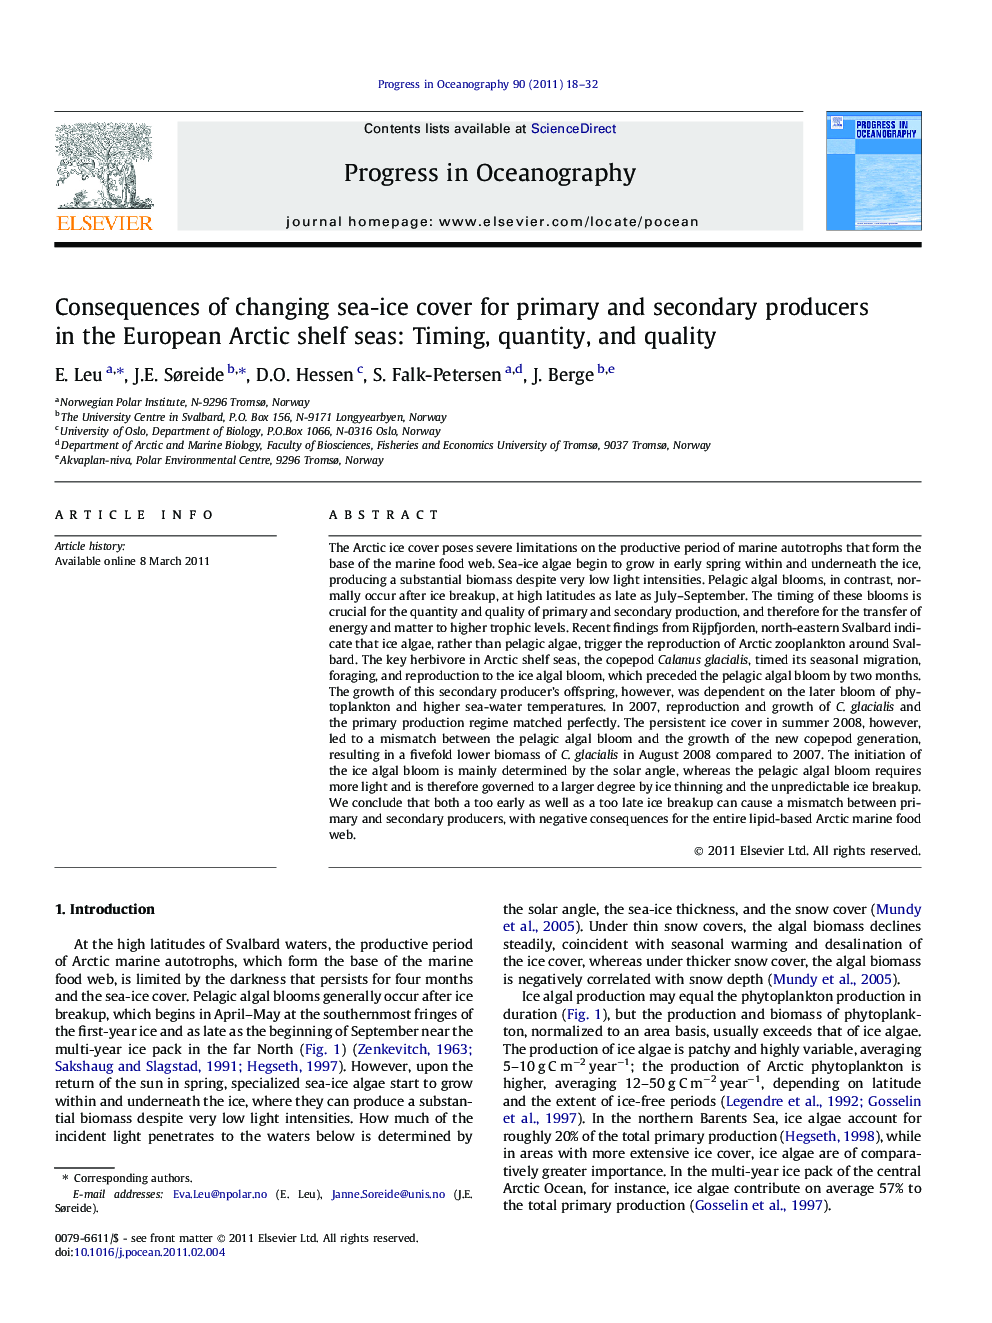 Consequences of changing sea-ice cover for primary and secondary producers in the European Arctic shelf seas: Timing, quantity, and quality